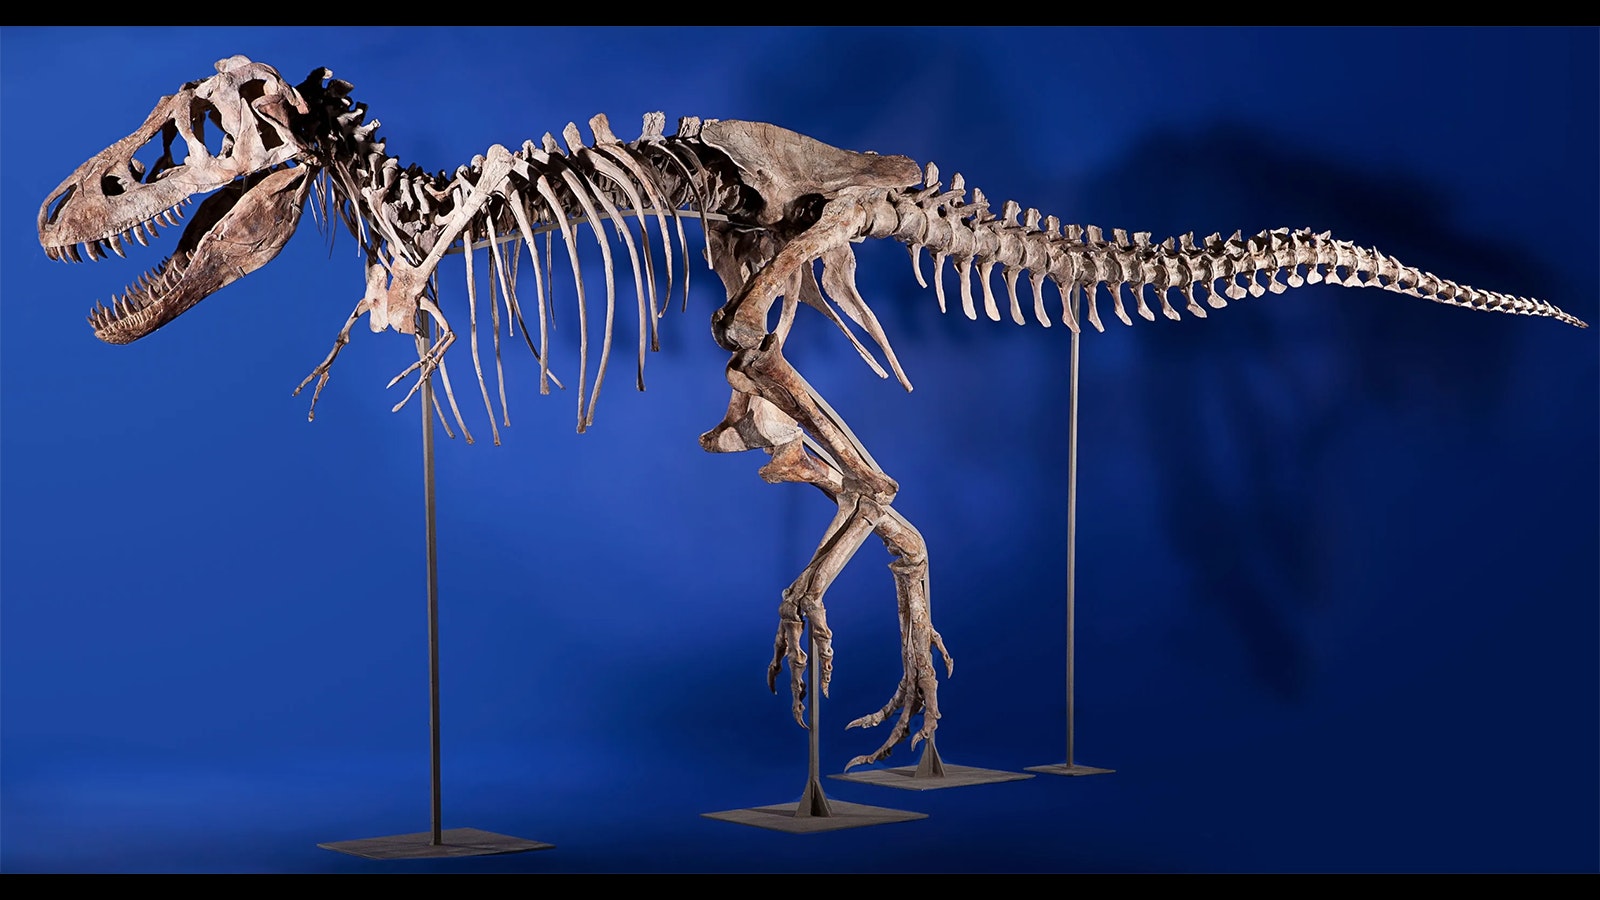 A complete Tarbosaurus skeleton. This specimen was sold by Heritage Auctions for more than $1 million before becoming the object of United States v. One Tyrannosaurus Bataar Skeleton, a contentious case that ultimately decided to void the sale and return the skeleton to Mongolia.